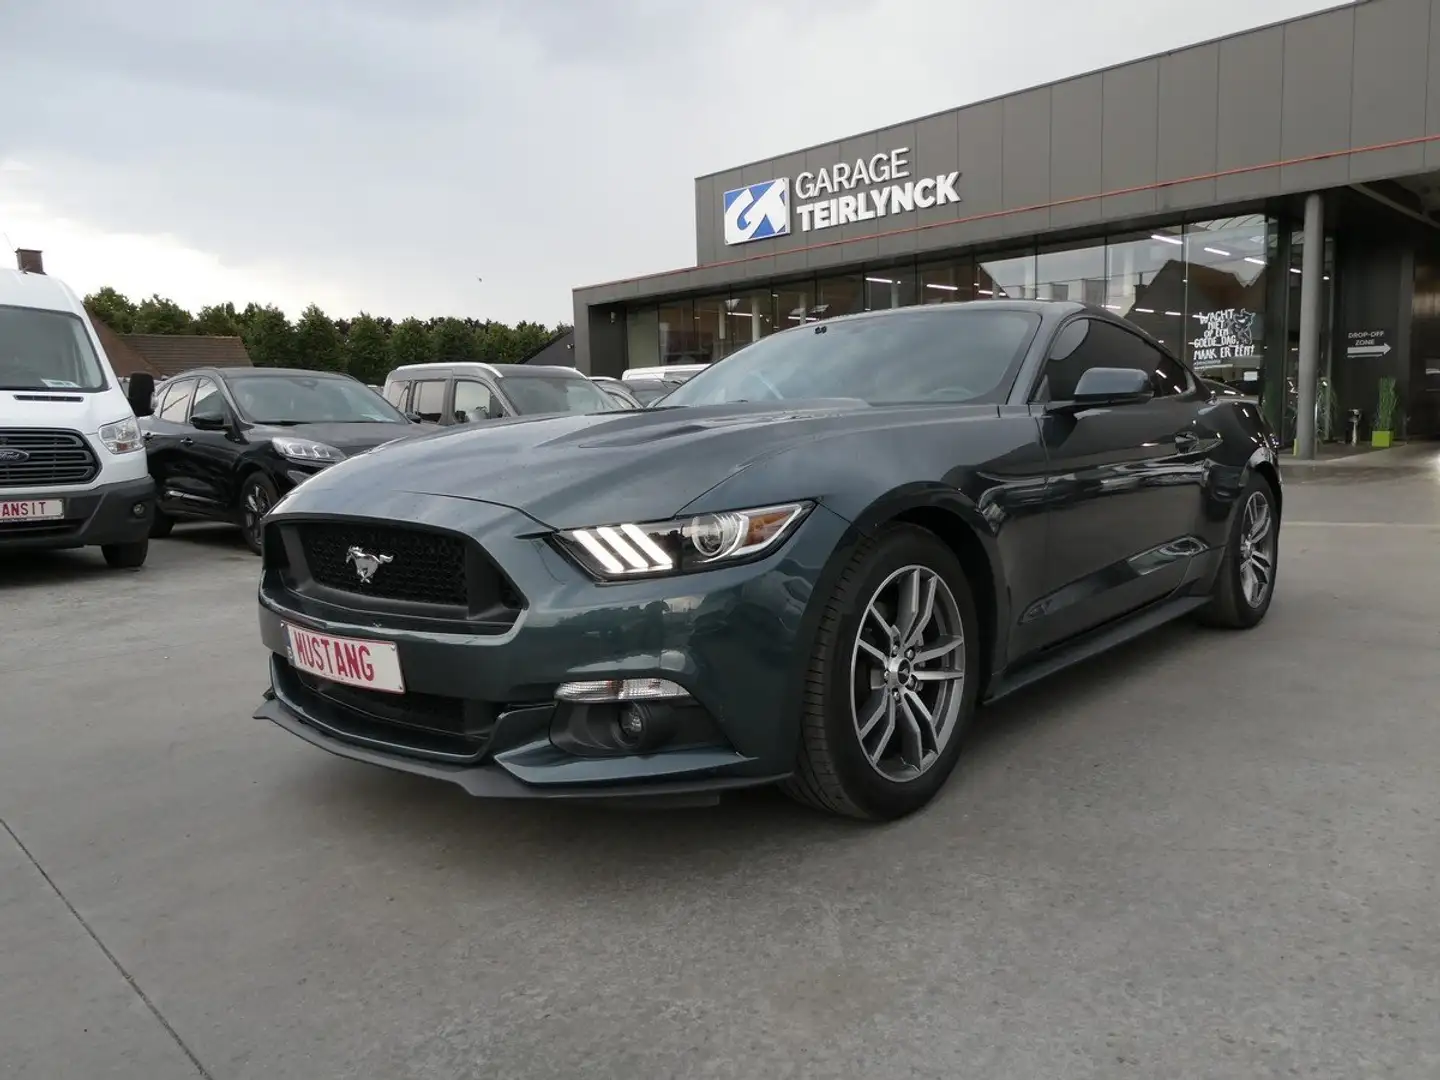 Ford Mustang Coupe Automaat 2.3 i 317pk '15 33000km (48593) Grün - 1